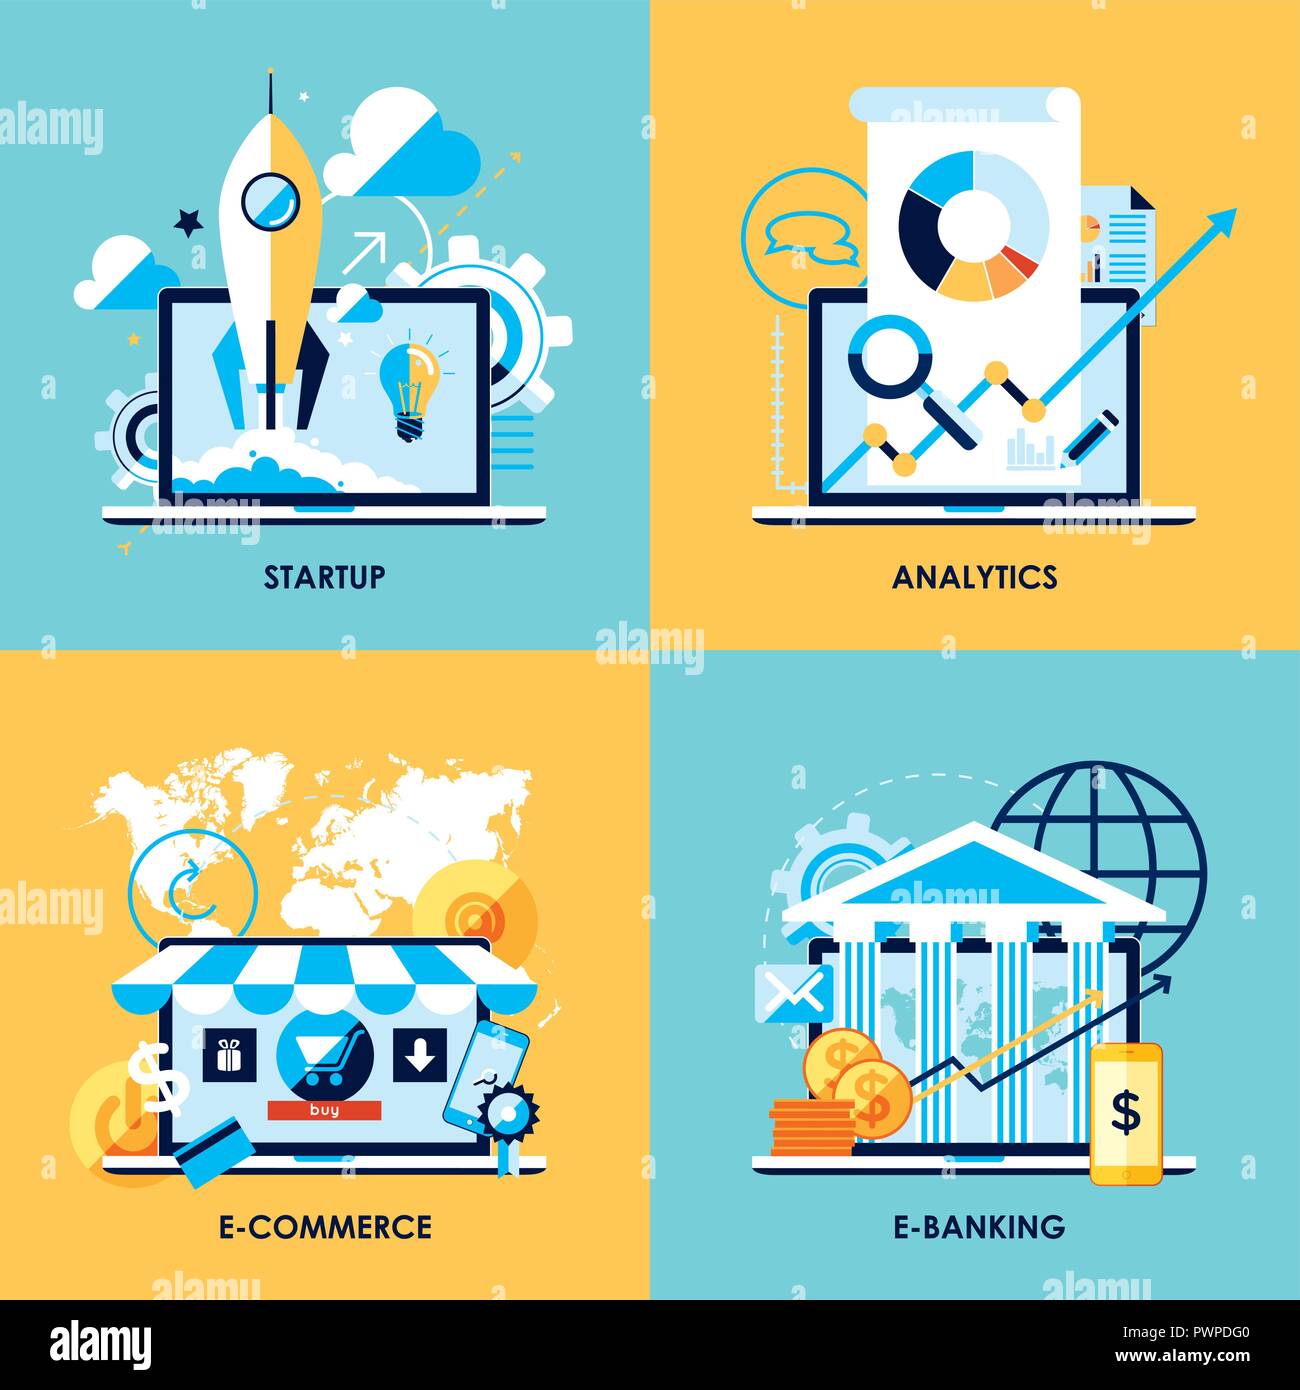 Flat design concepts for startup, analytics, e-commerce and e-banking business vector illustration for presentations Stock Vector